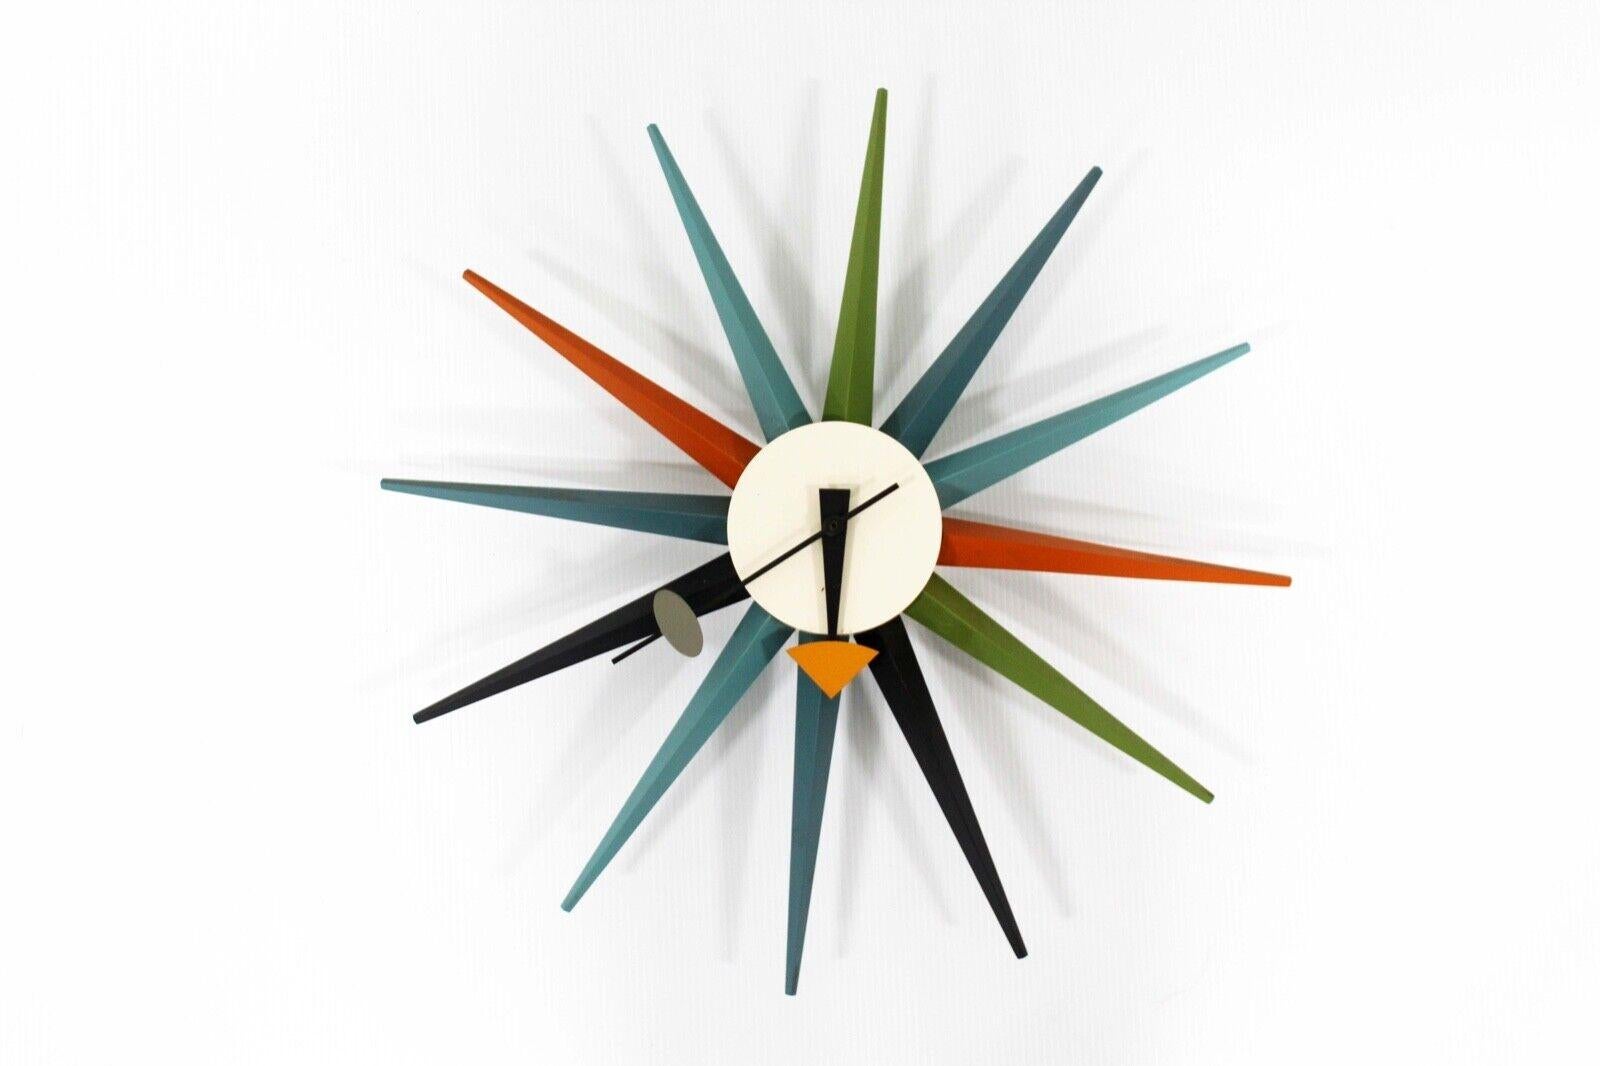 For your consideration is this iconic Mid-Century Modern Vitra Design Museum George Nelson sunburst wall clock. Measures: 19